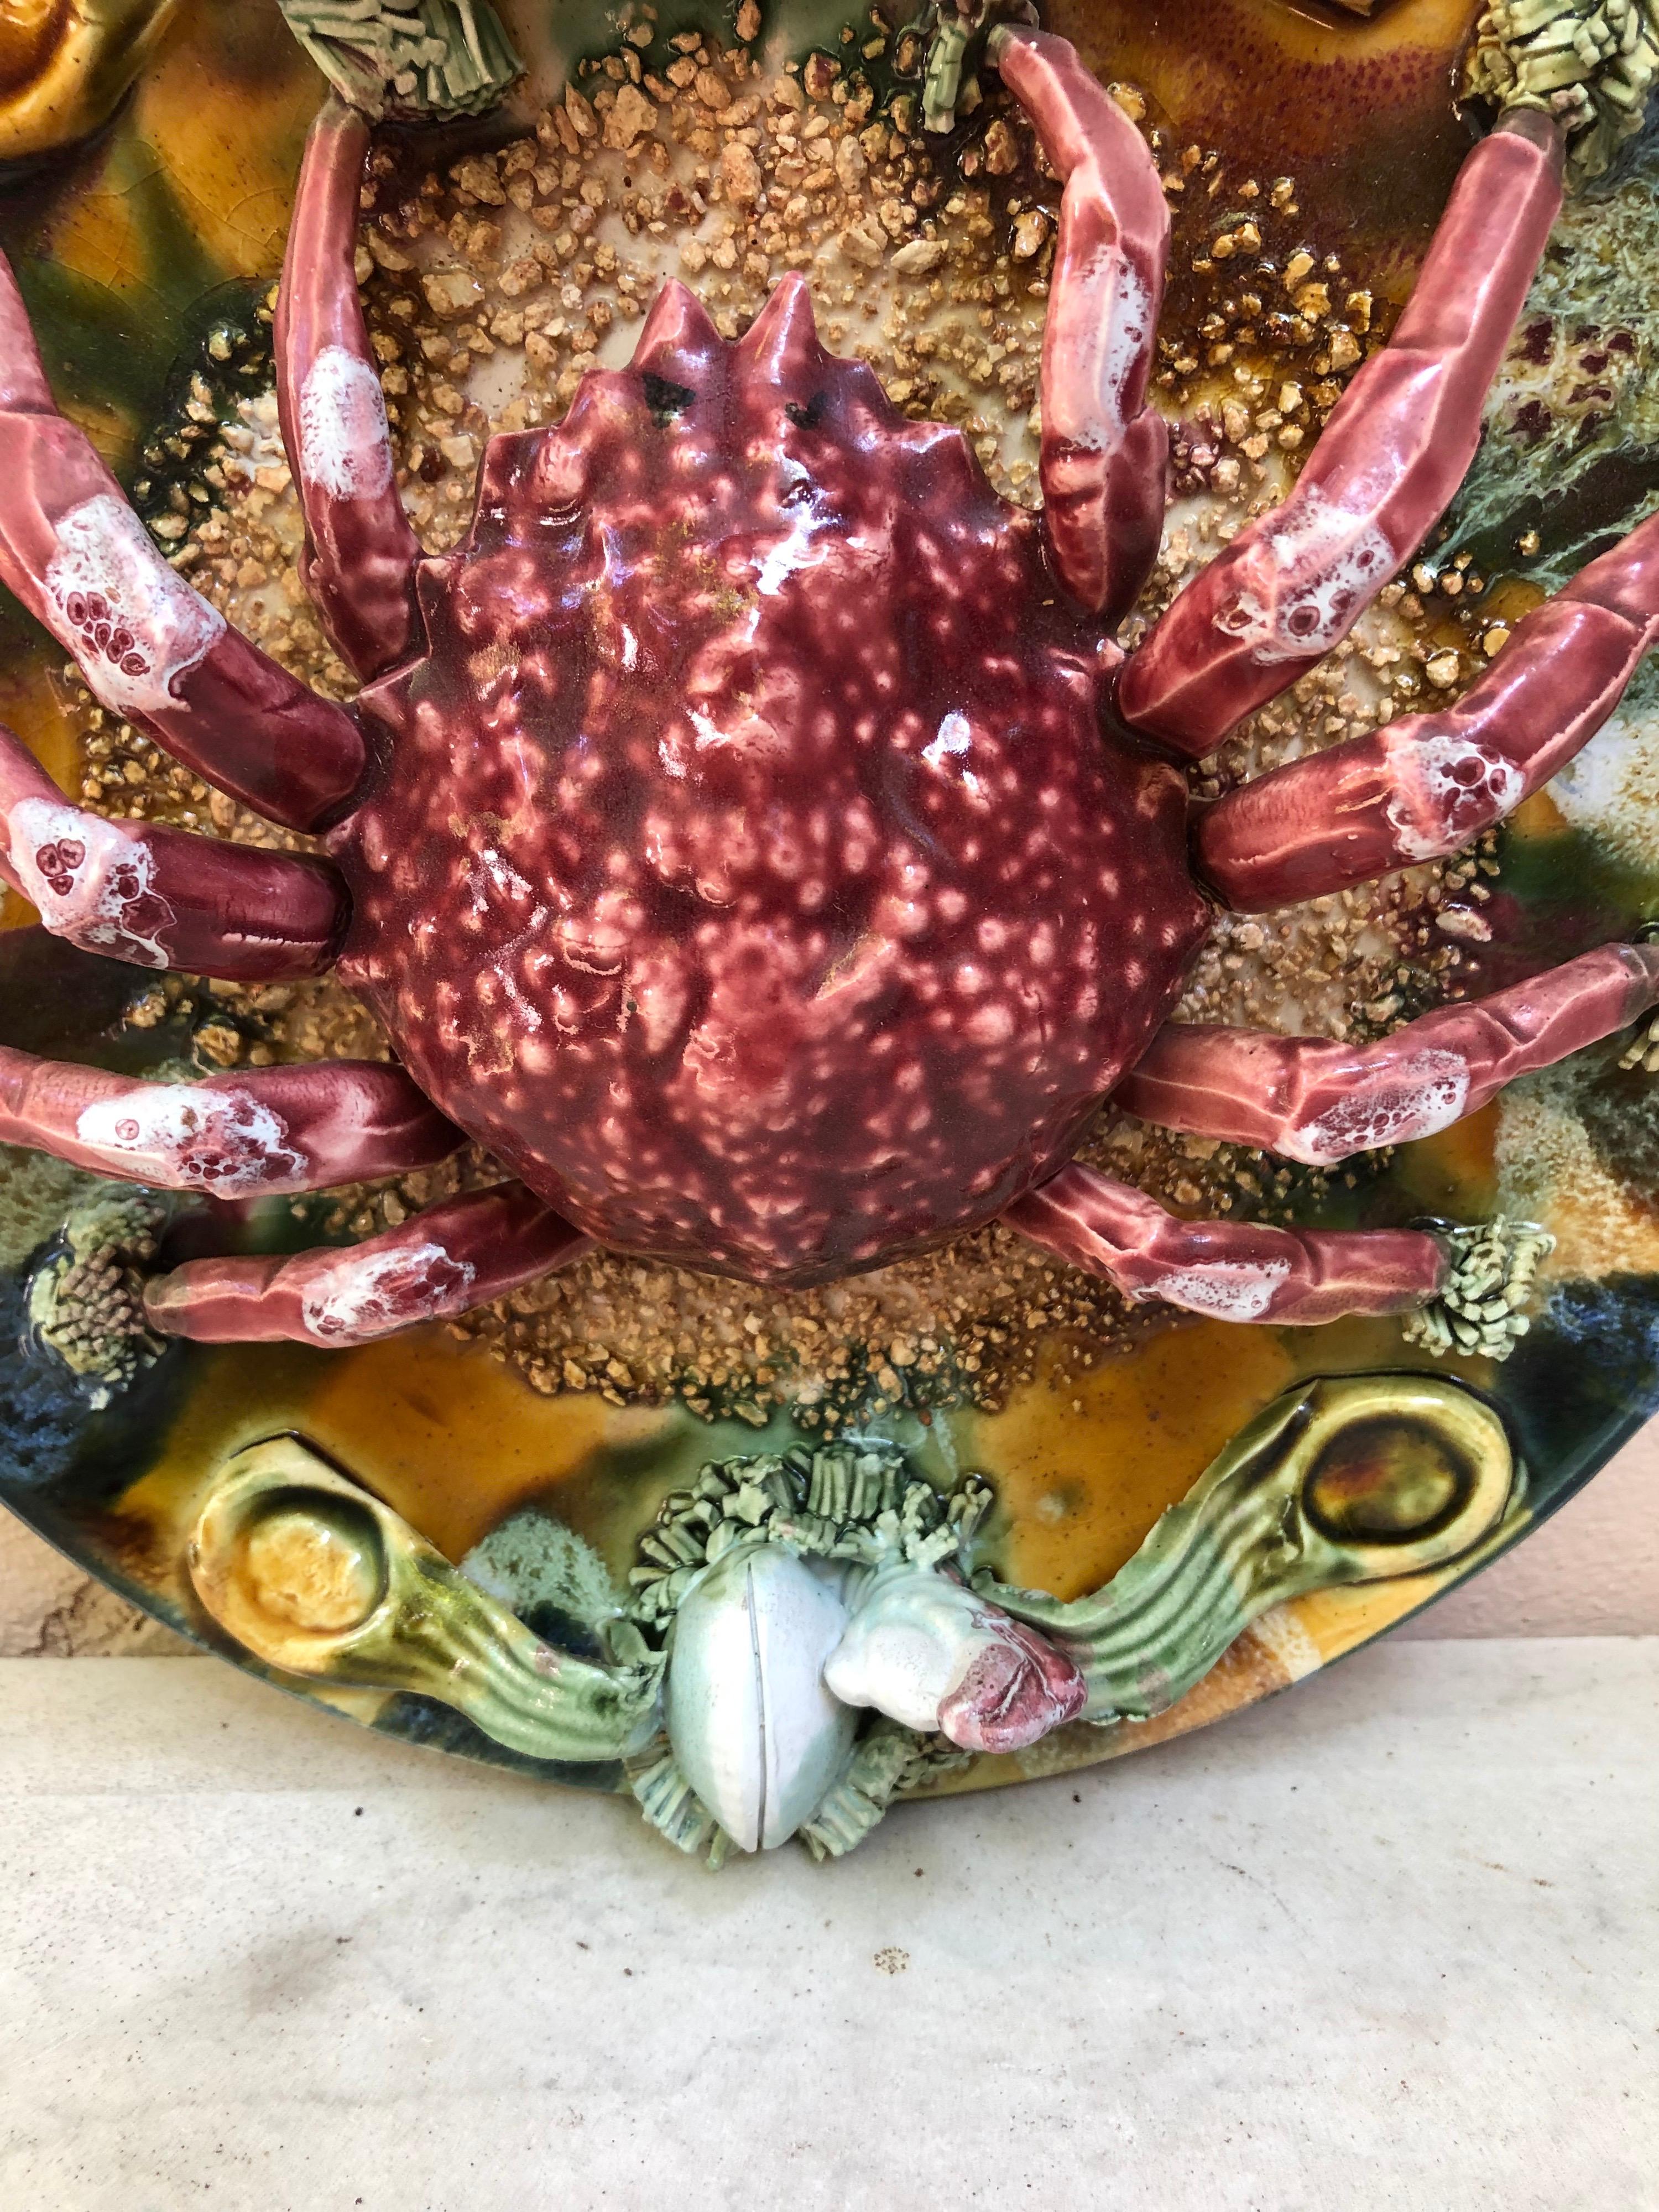 Majolica faience Palissy Portuguese spidercrab platter, circa 1940.
Decorated with mussels and shells,
Nautical.
Diameter / 10.5 inches.